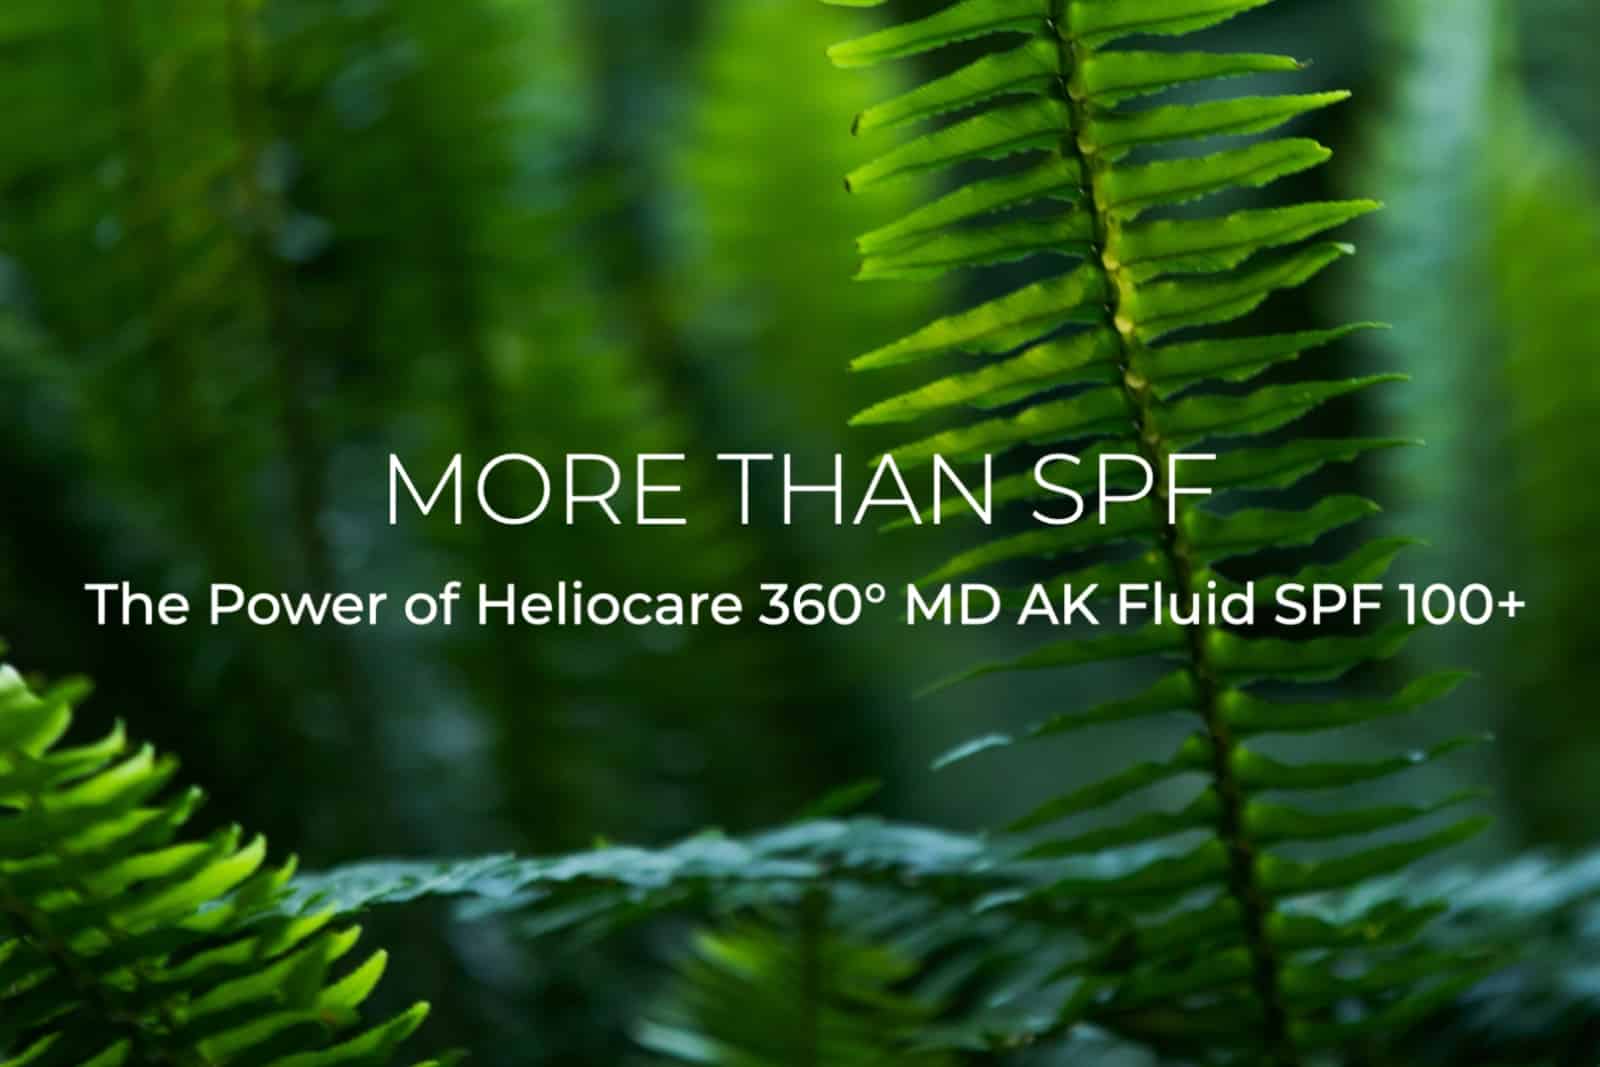 Beyond SPF: The Power of Heliocare 360 MD AK Fluid SPF 100+